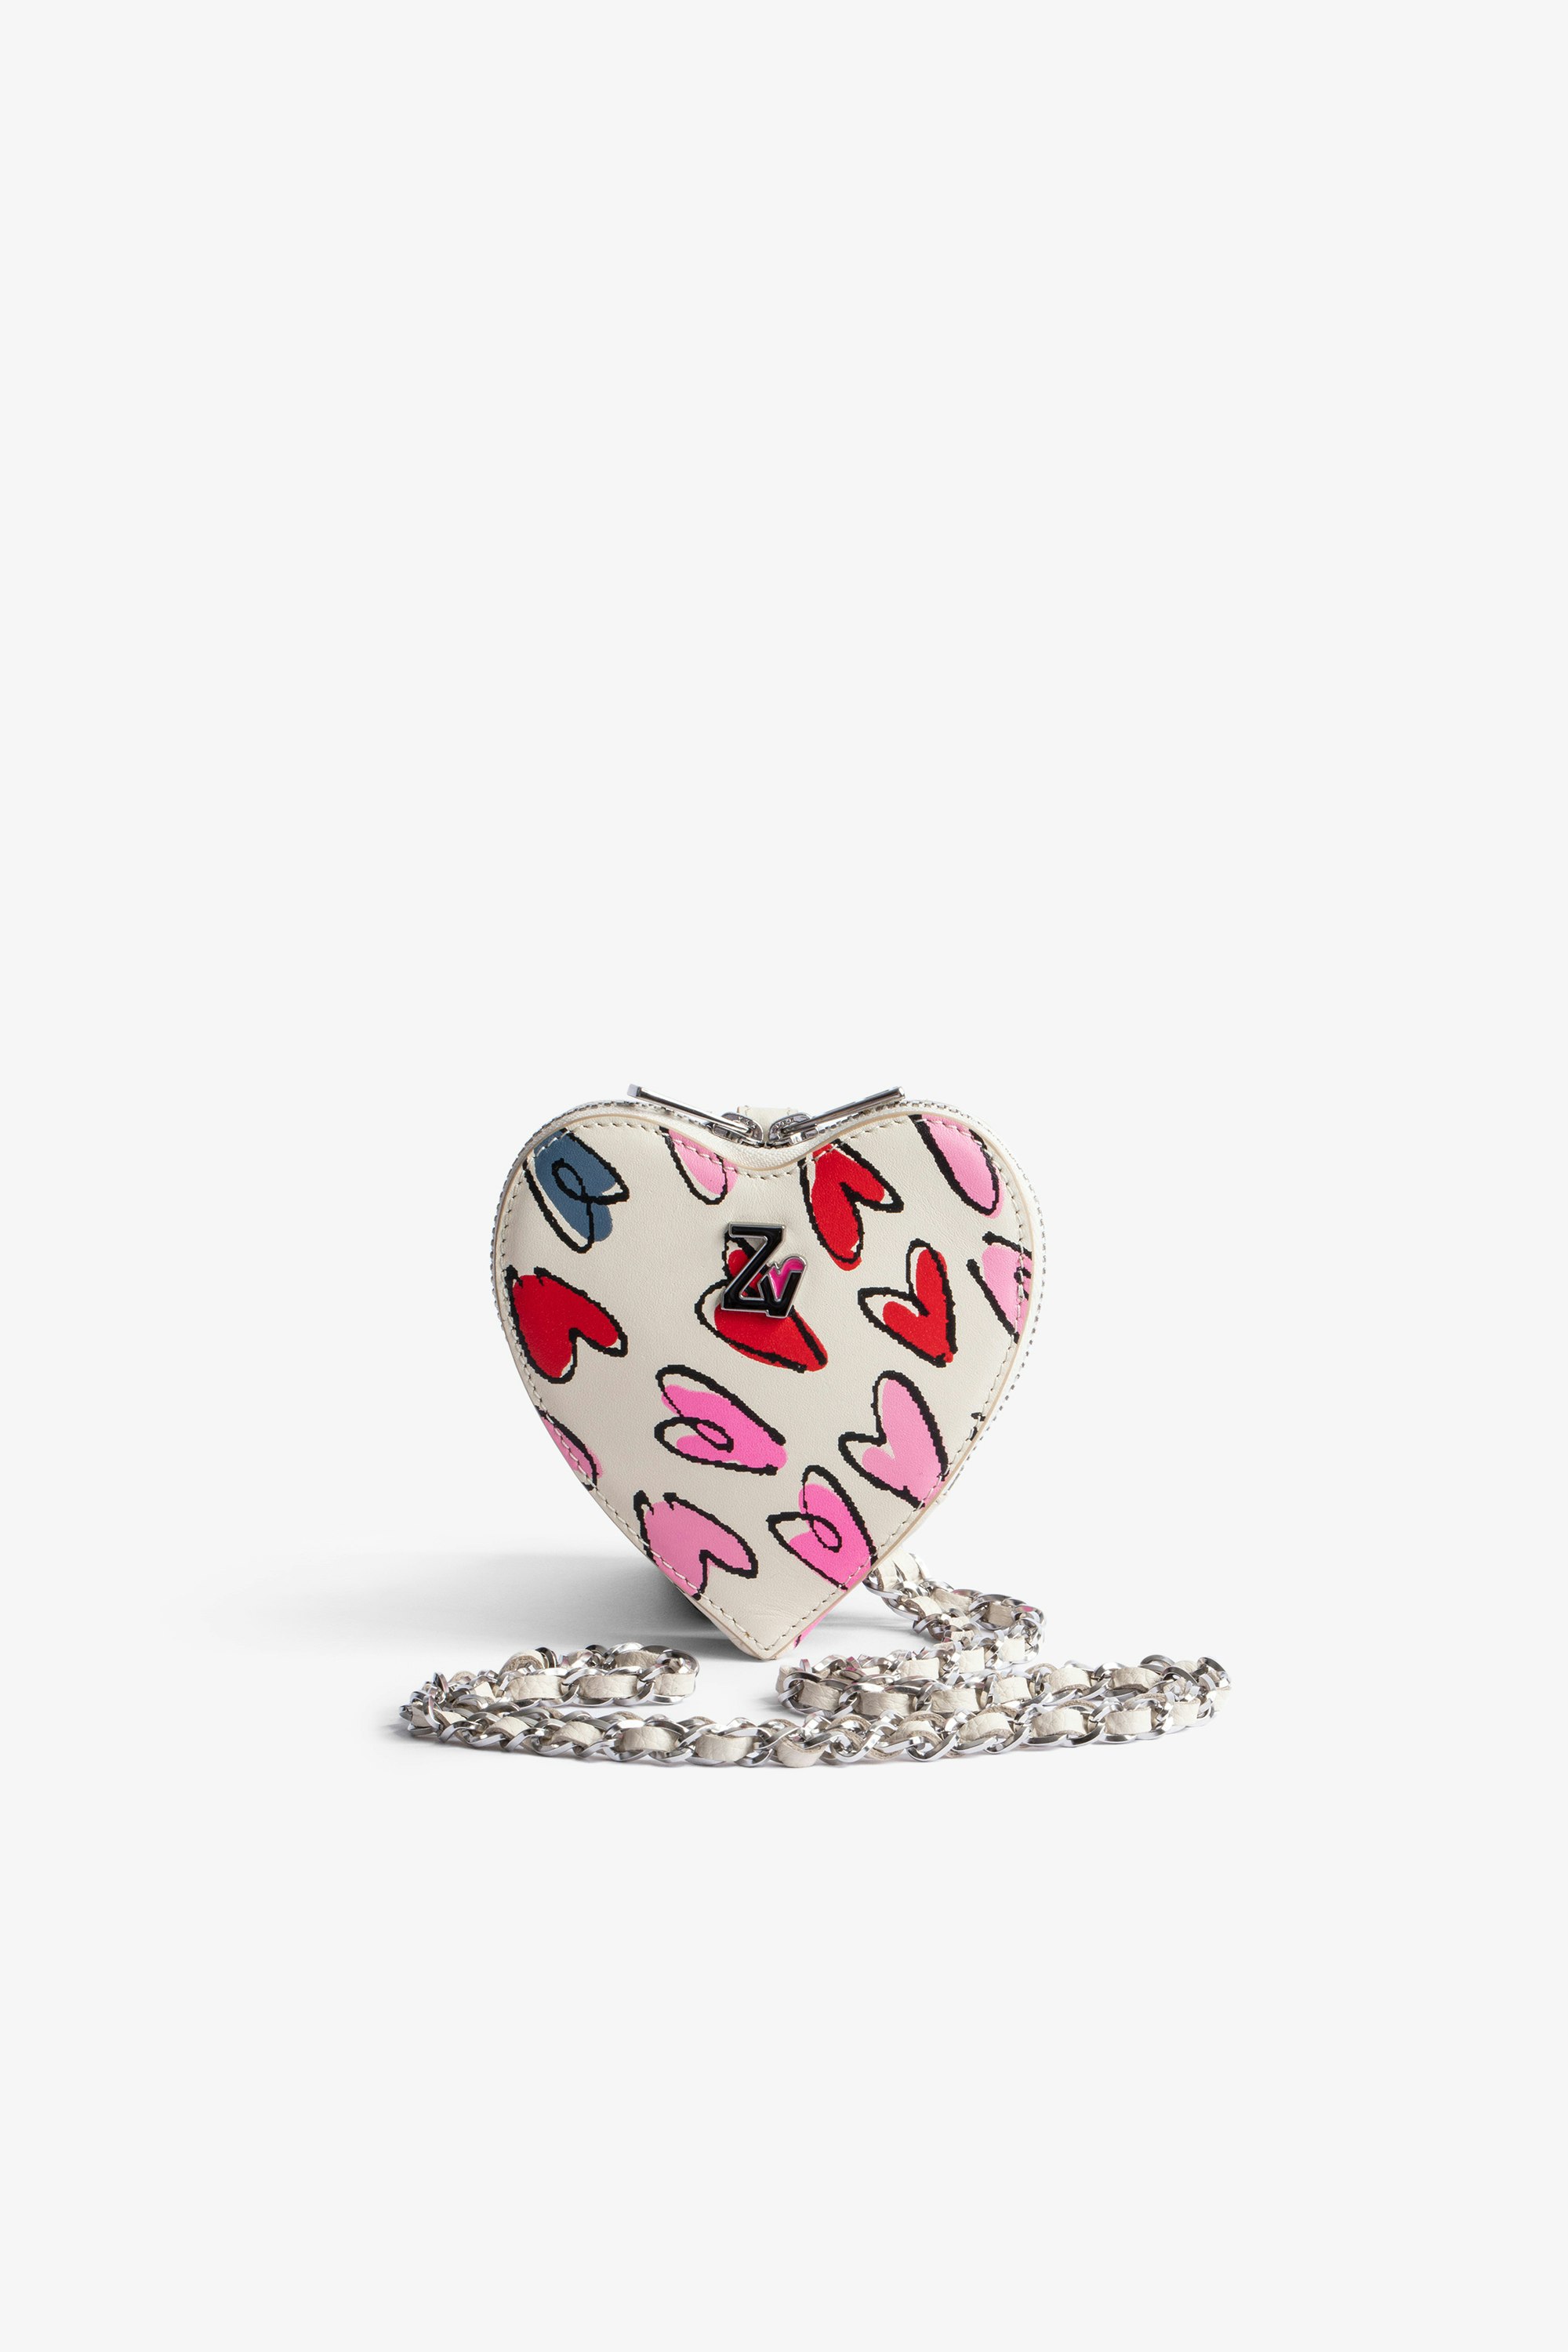 ZV Crush Le Coeur クラッチバッグ Women’s small zipped heart clutch with heart motifs